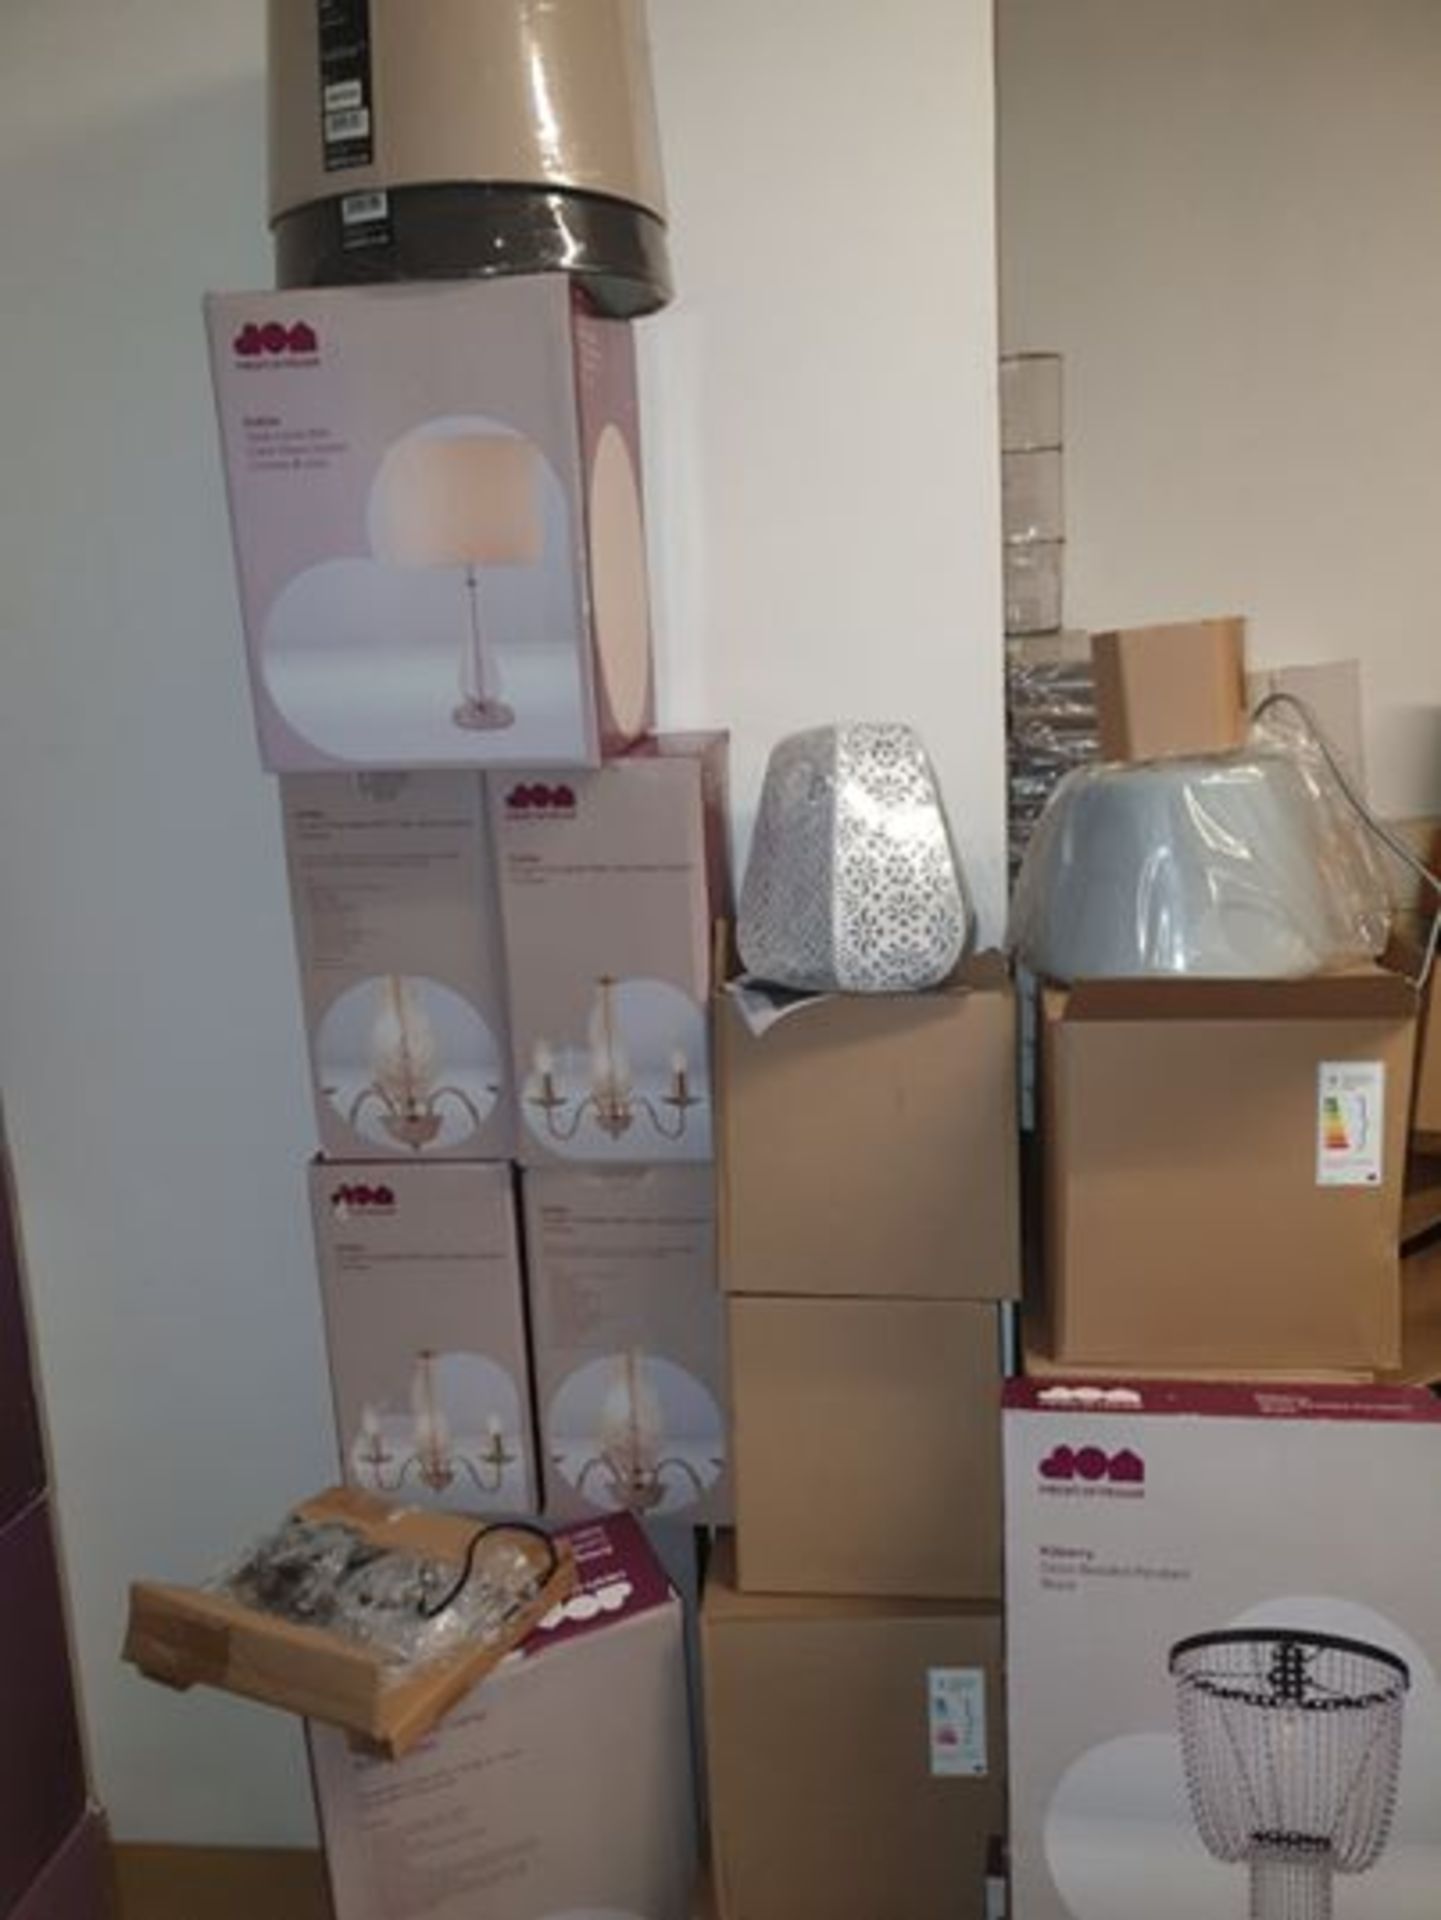 Branded Lamps And Lighting Rrp £1103.67 - Image 10 of 12